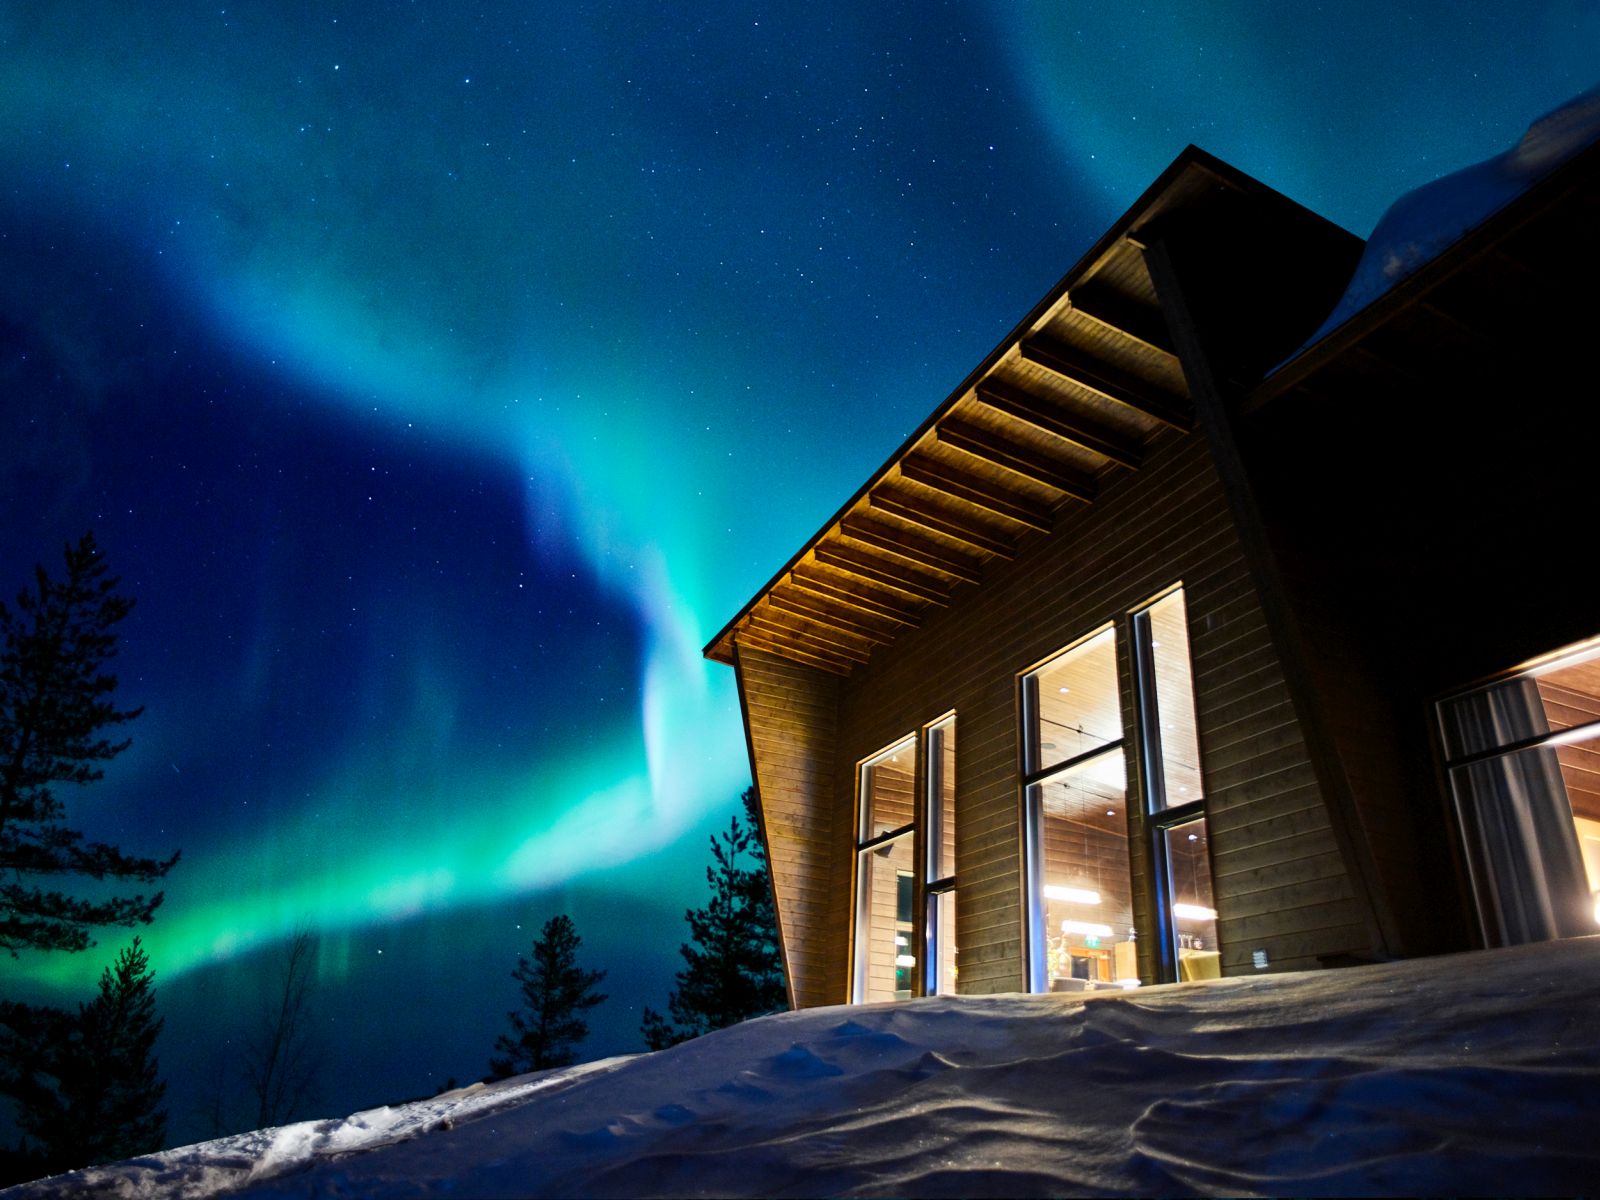 The Northern Lights shining over Octola wilderness lodge in Finland